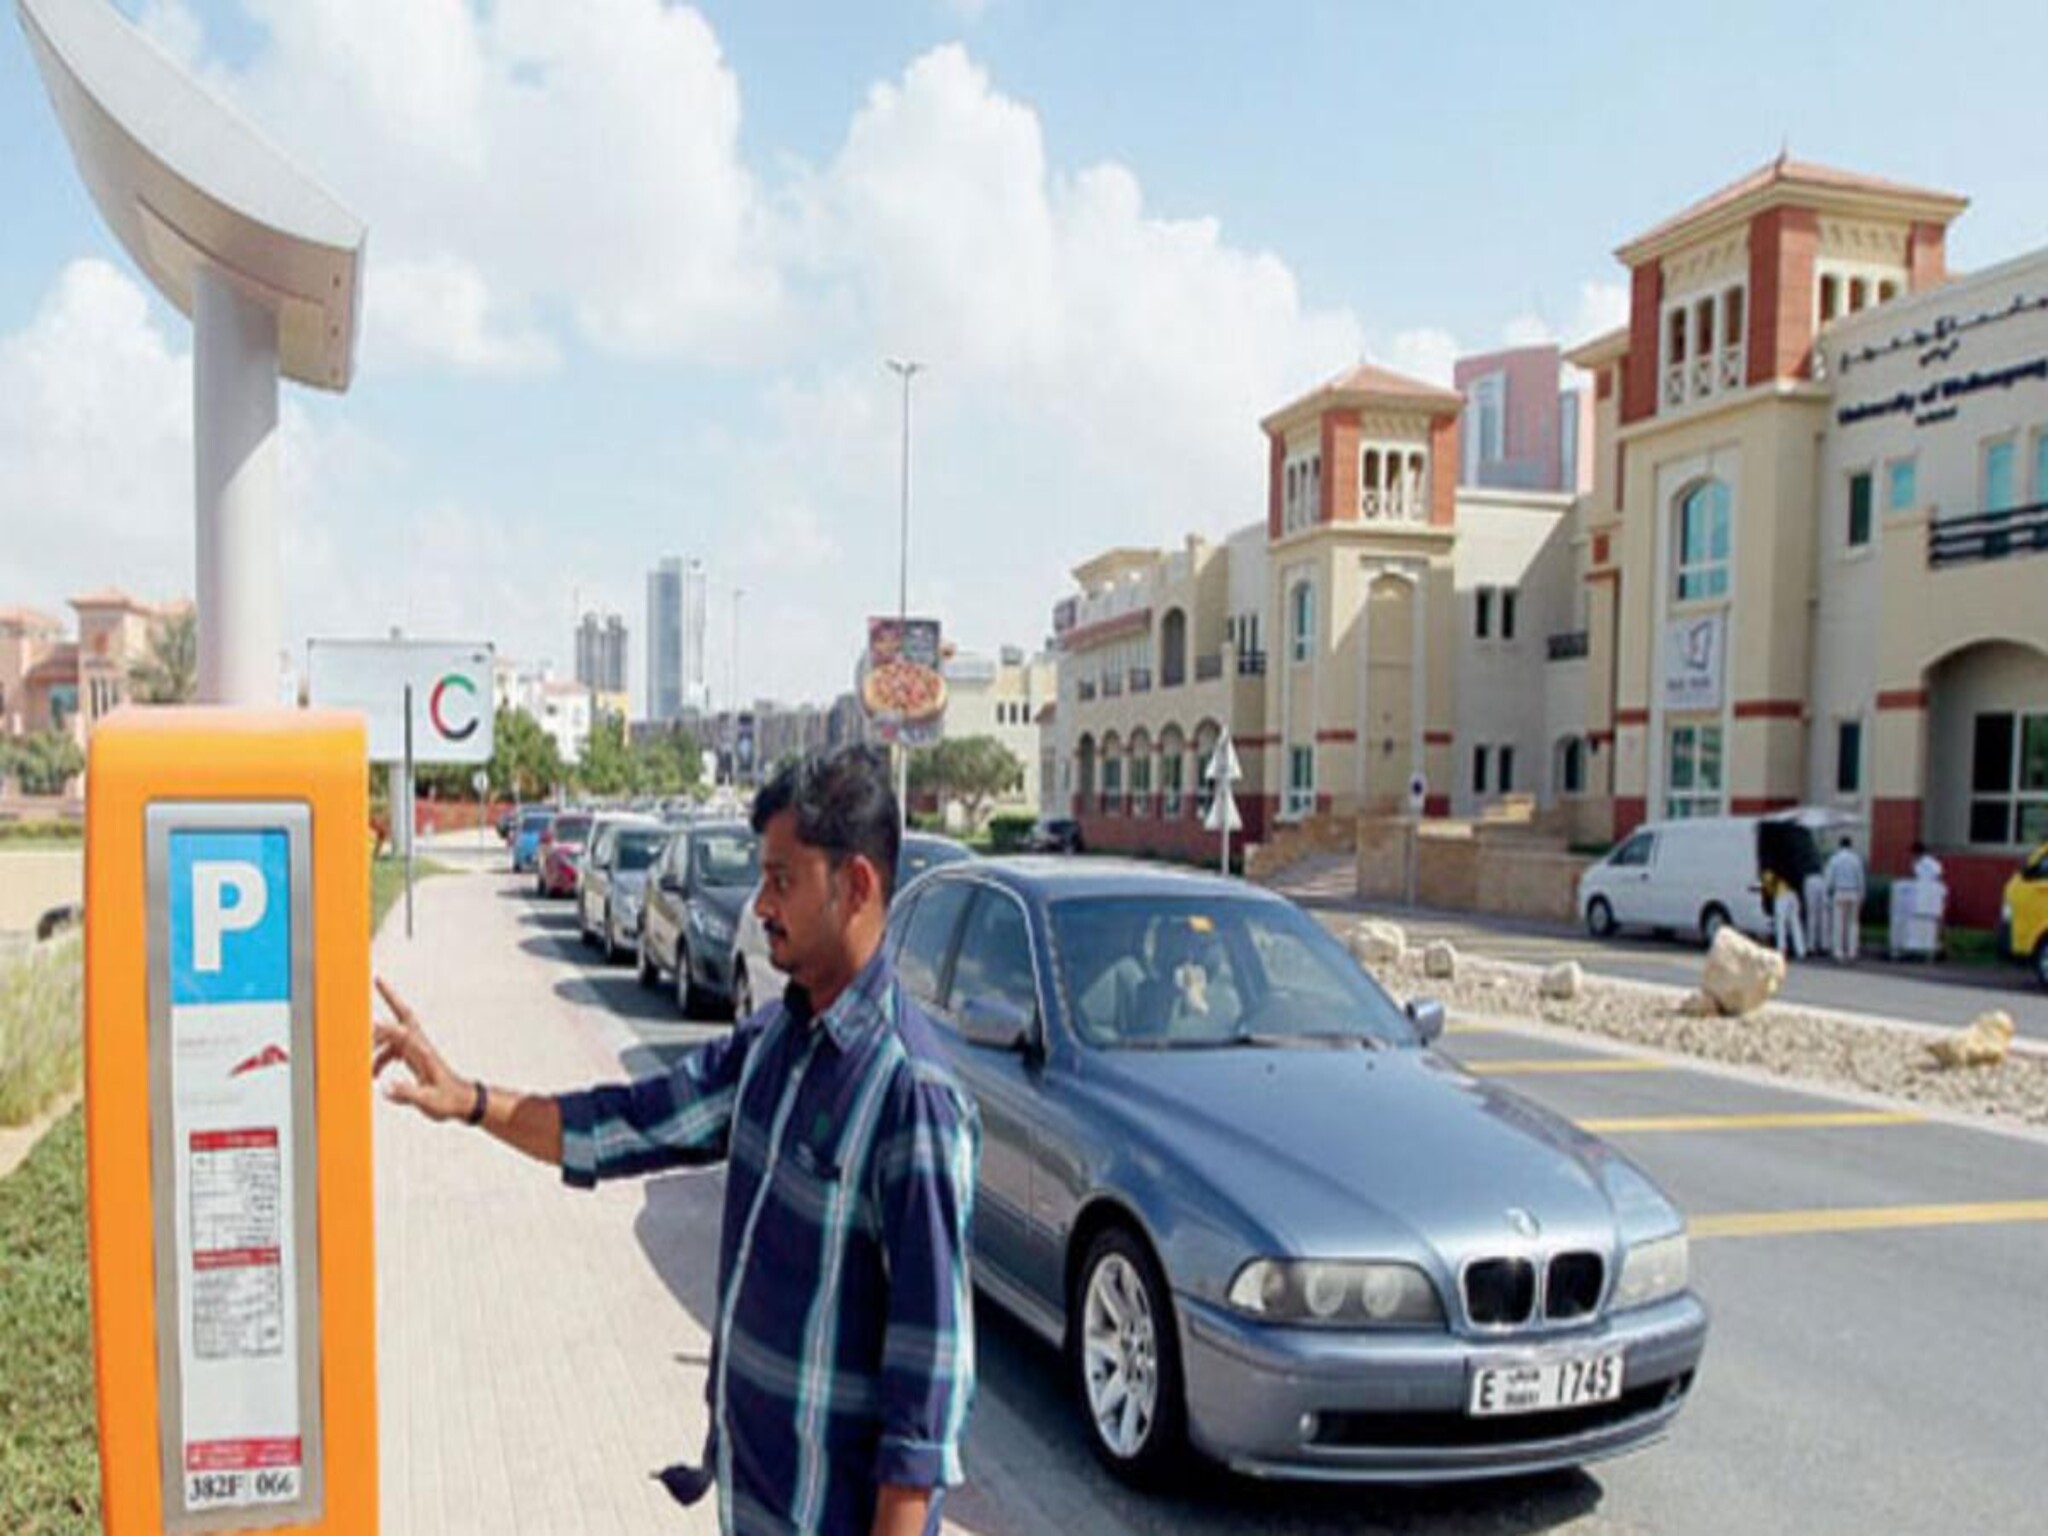 The UAE authorities announced the amendment of the system of paid parking fees in several areas